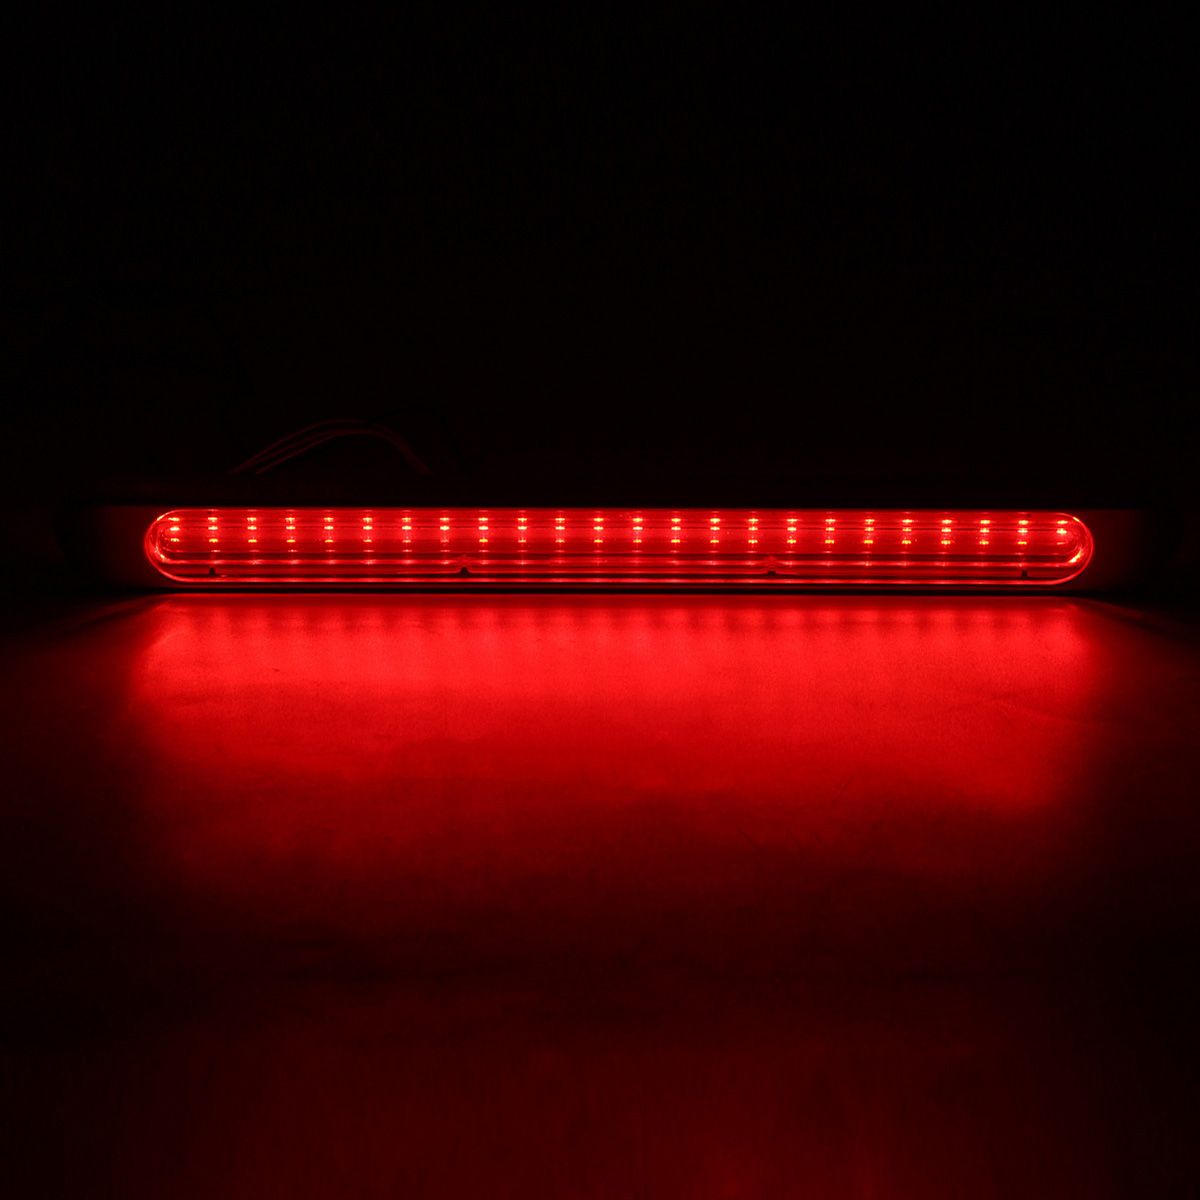 17-12-24V-47-LED-Dual-Color-Car-Tail-Light-Turn-Lamp-Waterproof-for-Truck-Trailer-1315686